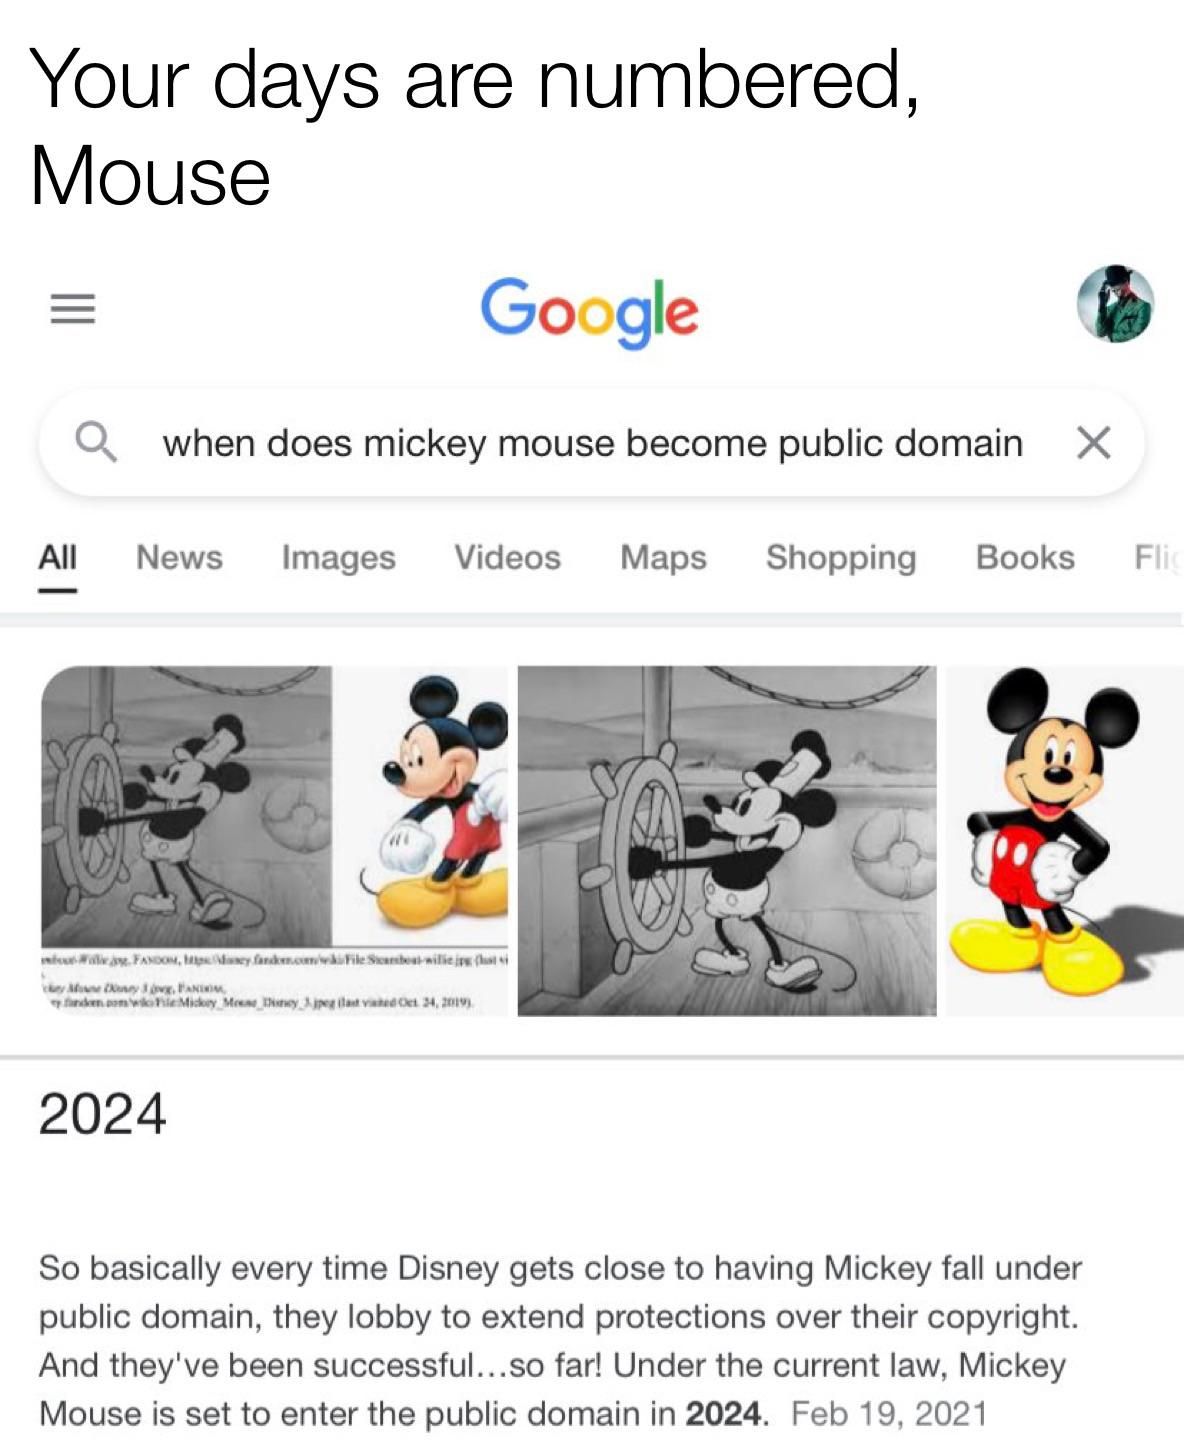 The era of the Mouse comes to a close